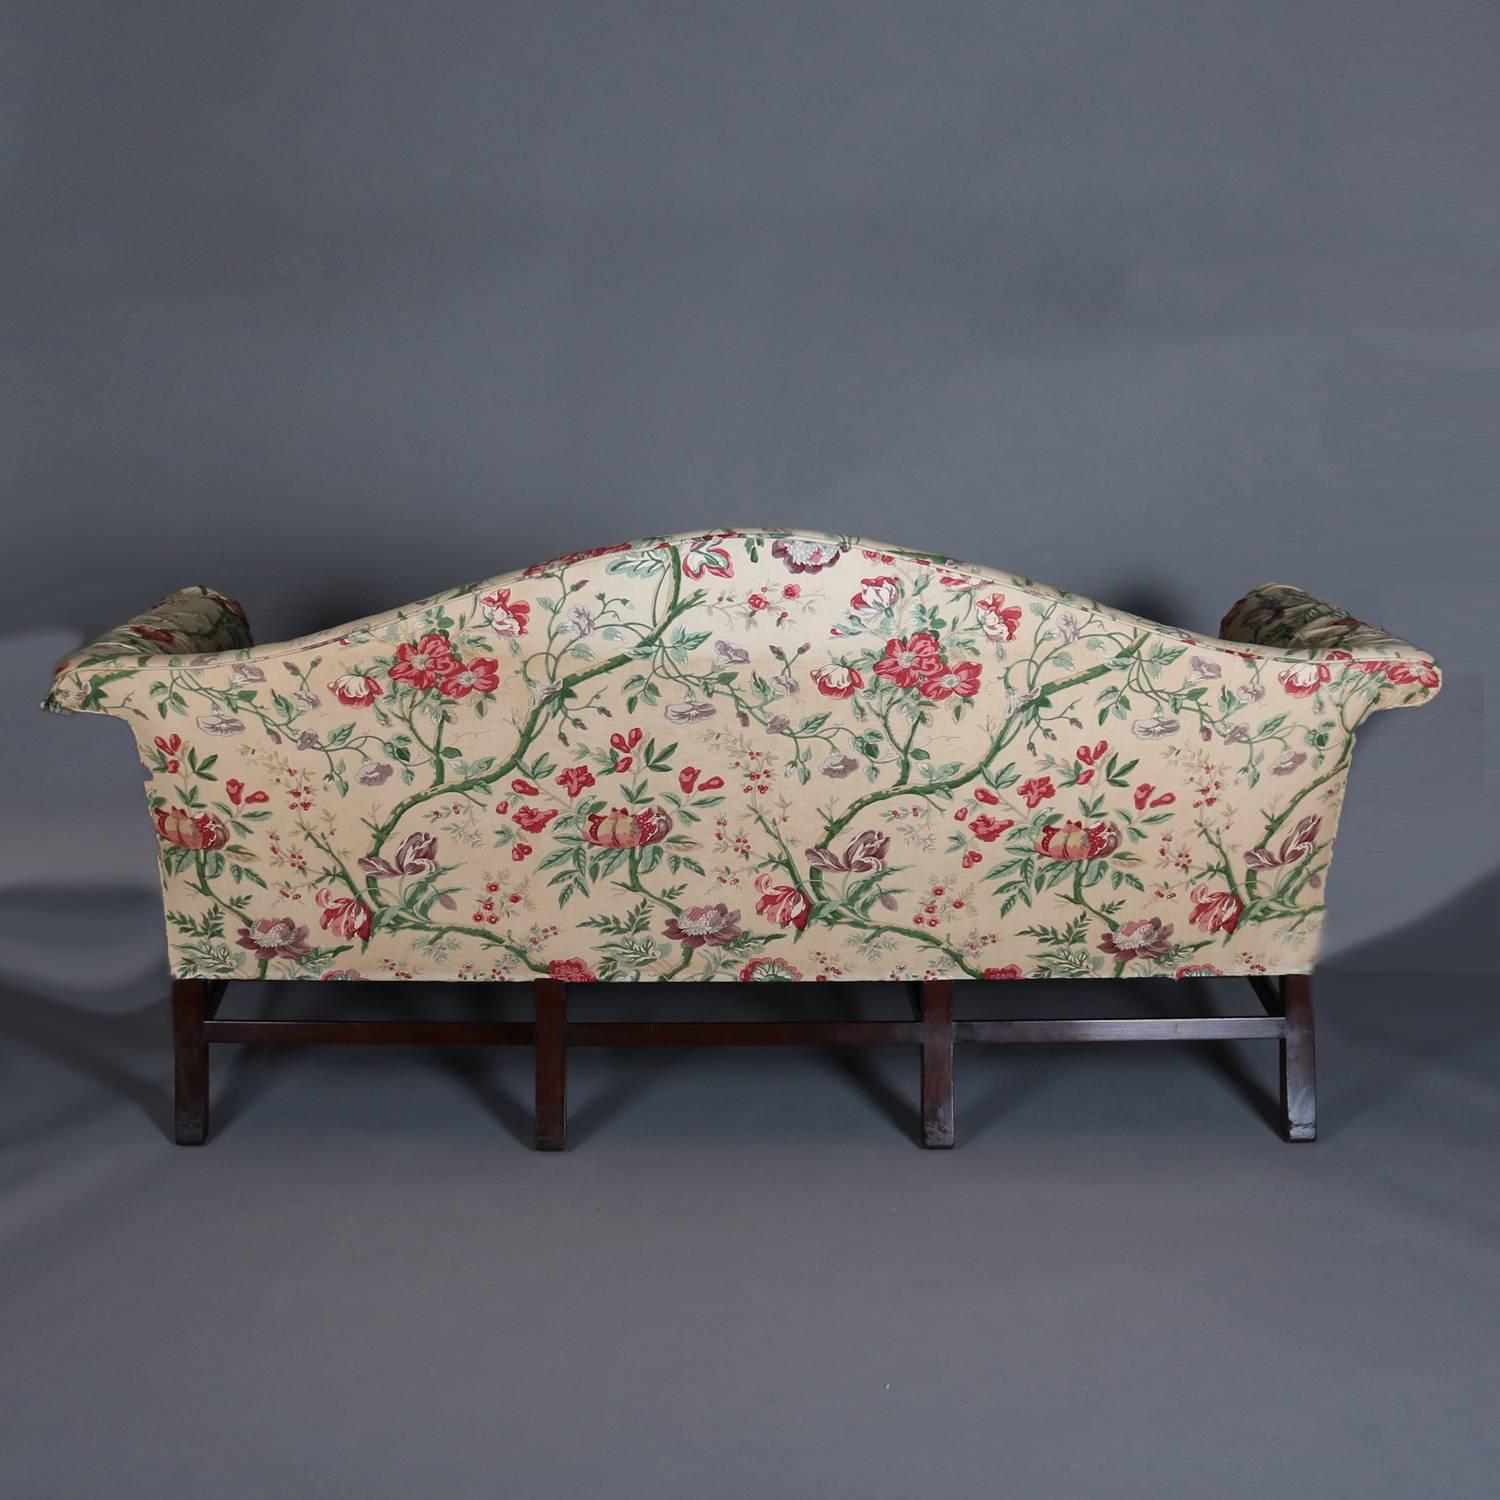 Sheraton camel back sofa features floral chintz upholstery and scroll arms, 20th century

*Matching chairs listed separately*

 Measures - 38"h x 79"w x 34"d, 20" seat height